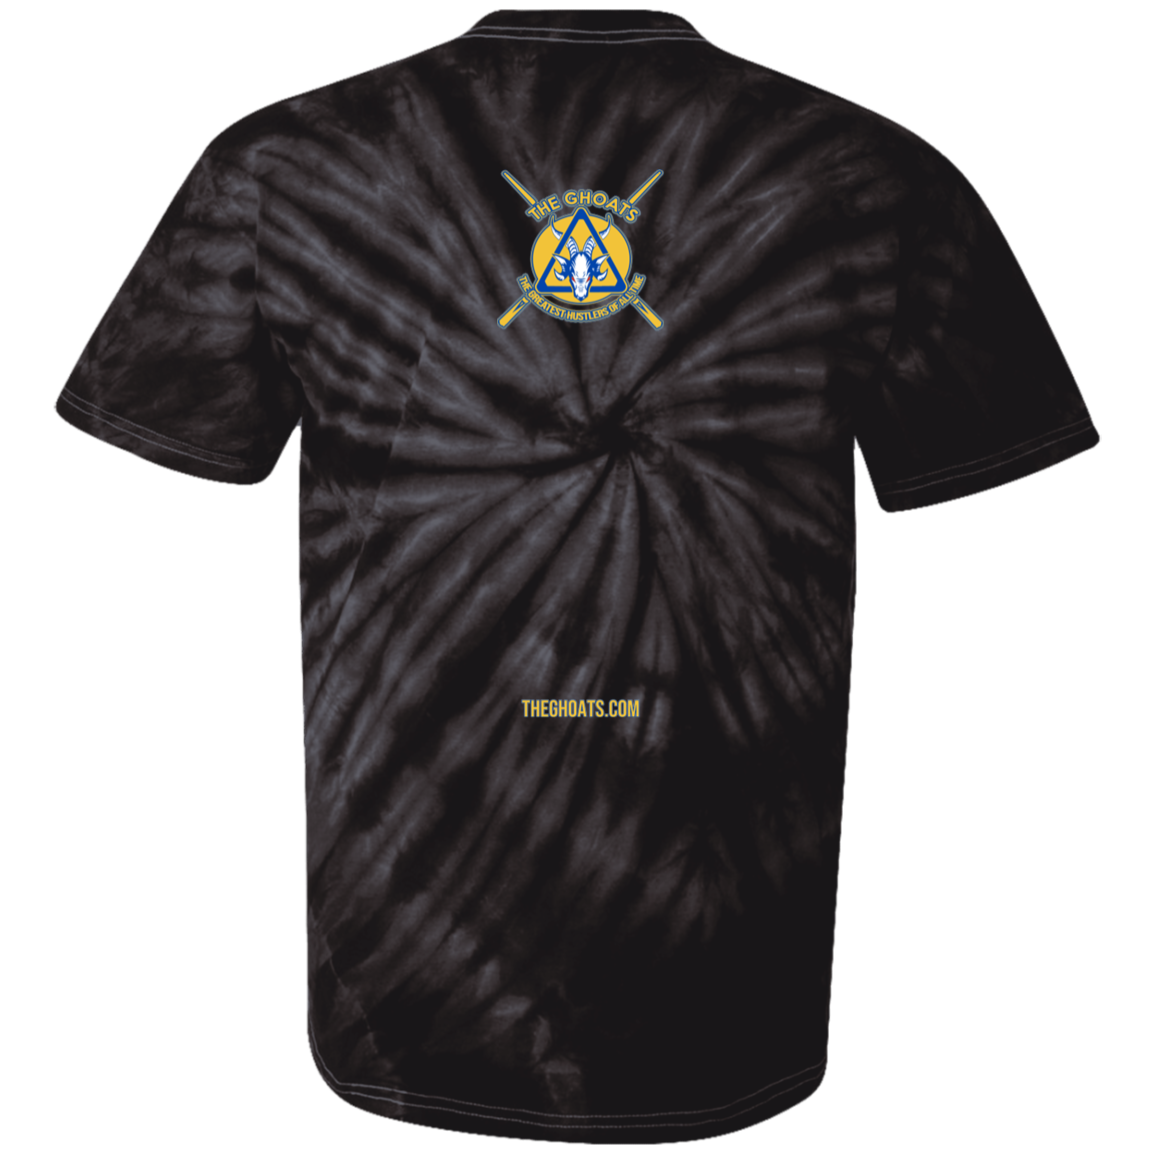 The GHOATS Custom Design. #12 GOLDEN STATE HUSTLERS.	Youth Tie Dye T-Shirt